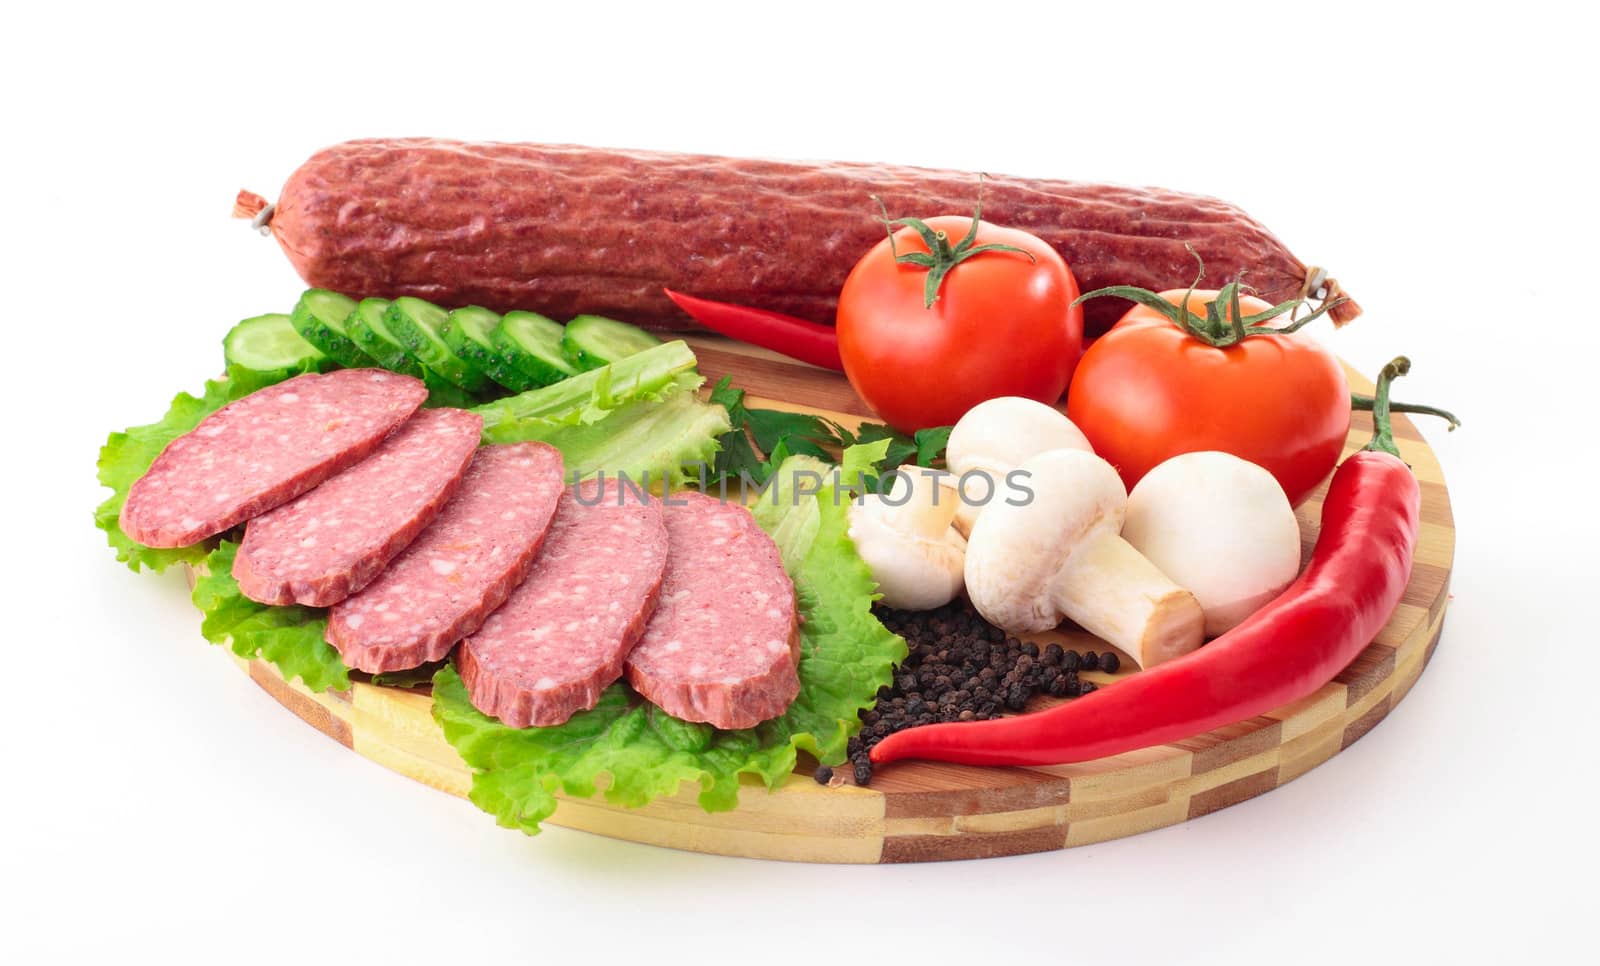 sliced sausage with vegetables on board by shutswis